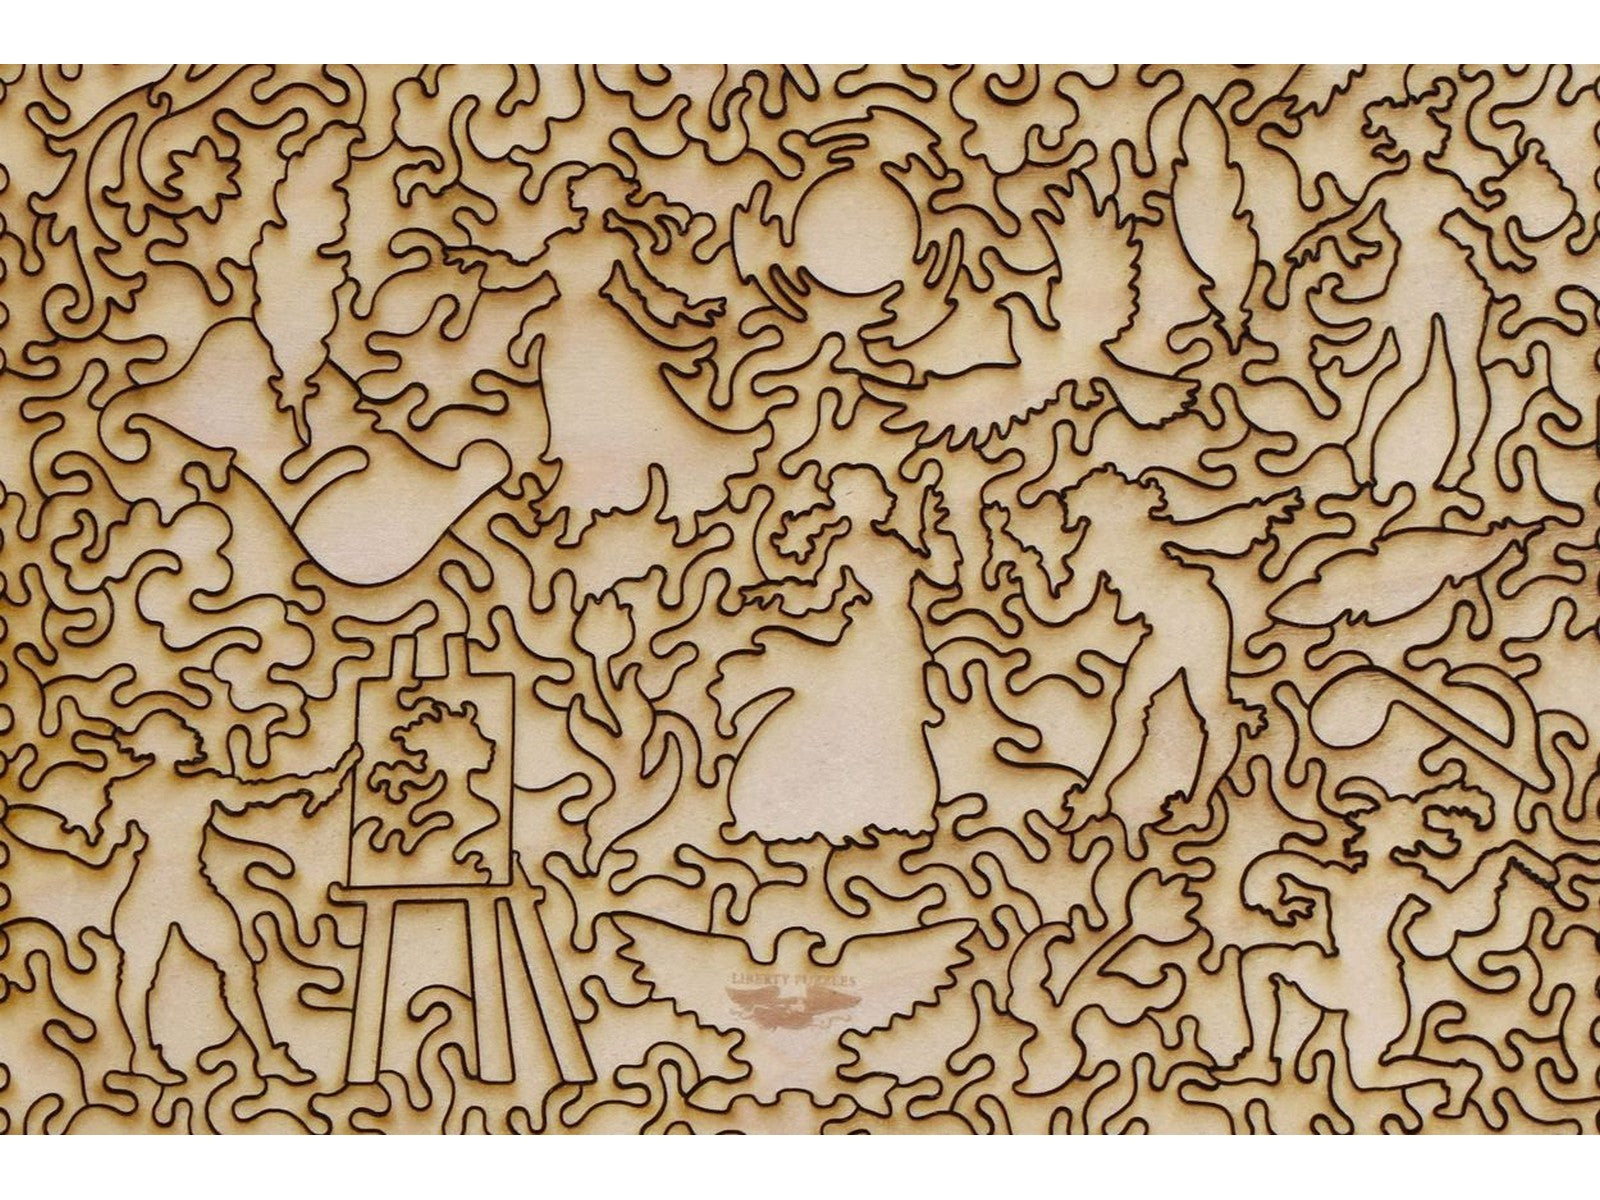 A closeup of the back of the puzzle, Girl Reading a Letter by an Open Window, showing the detail in the pieces.